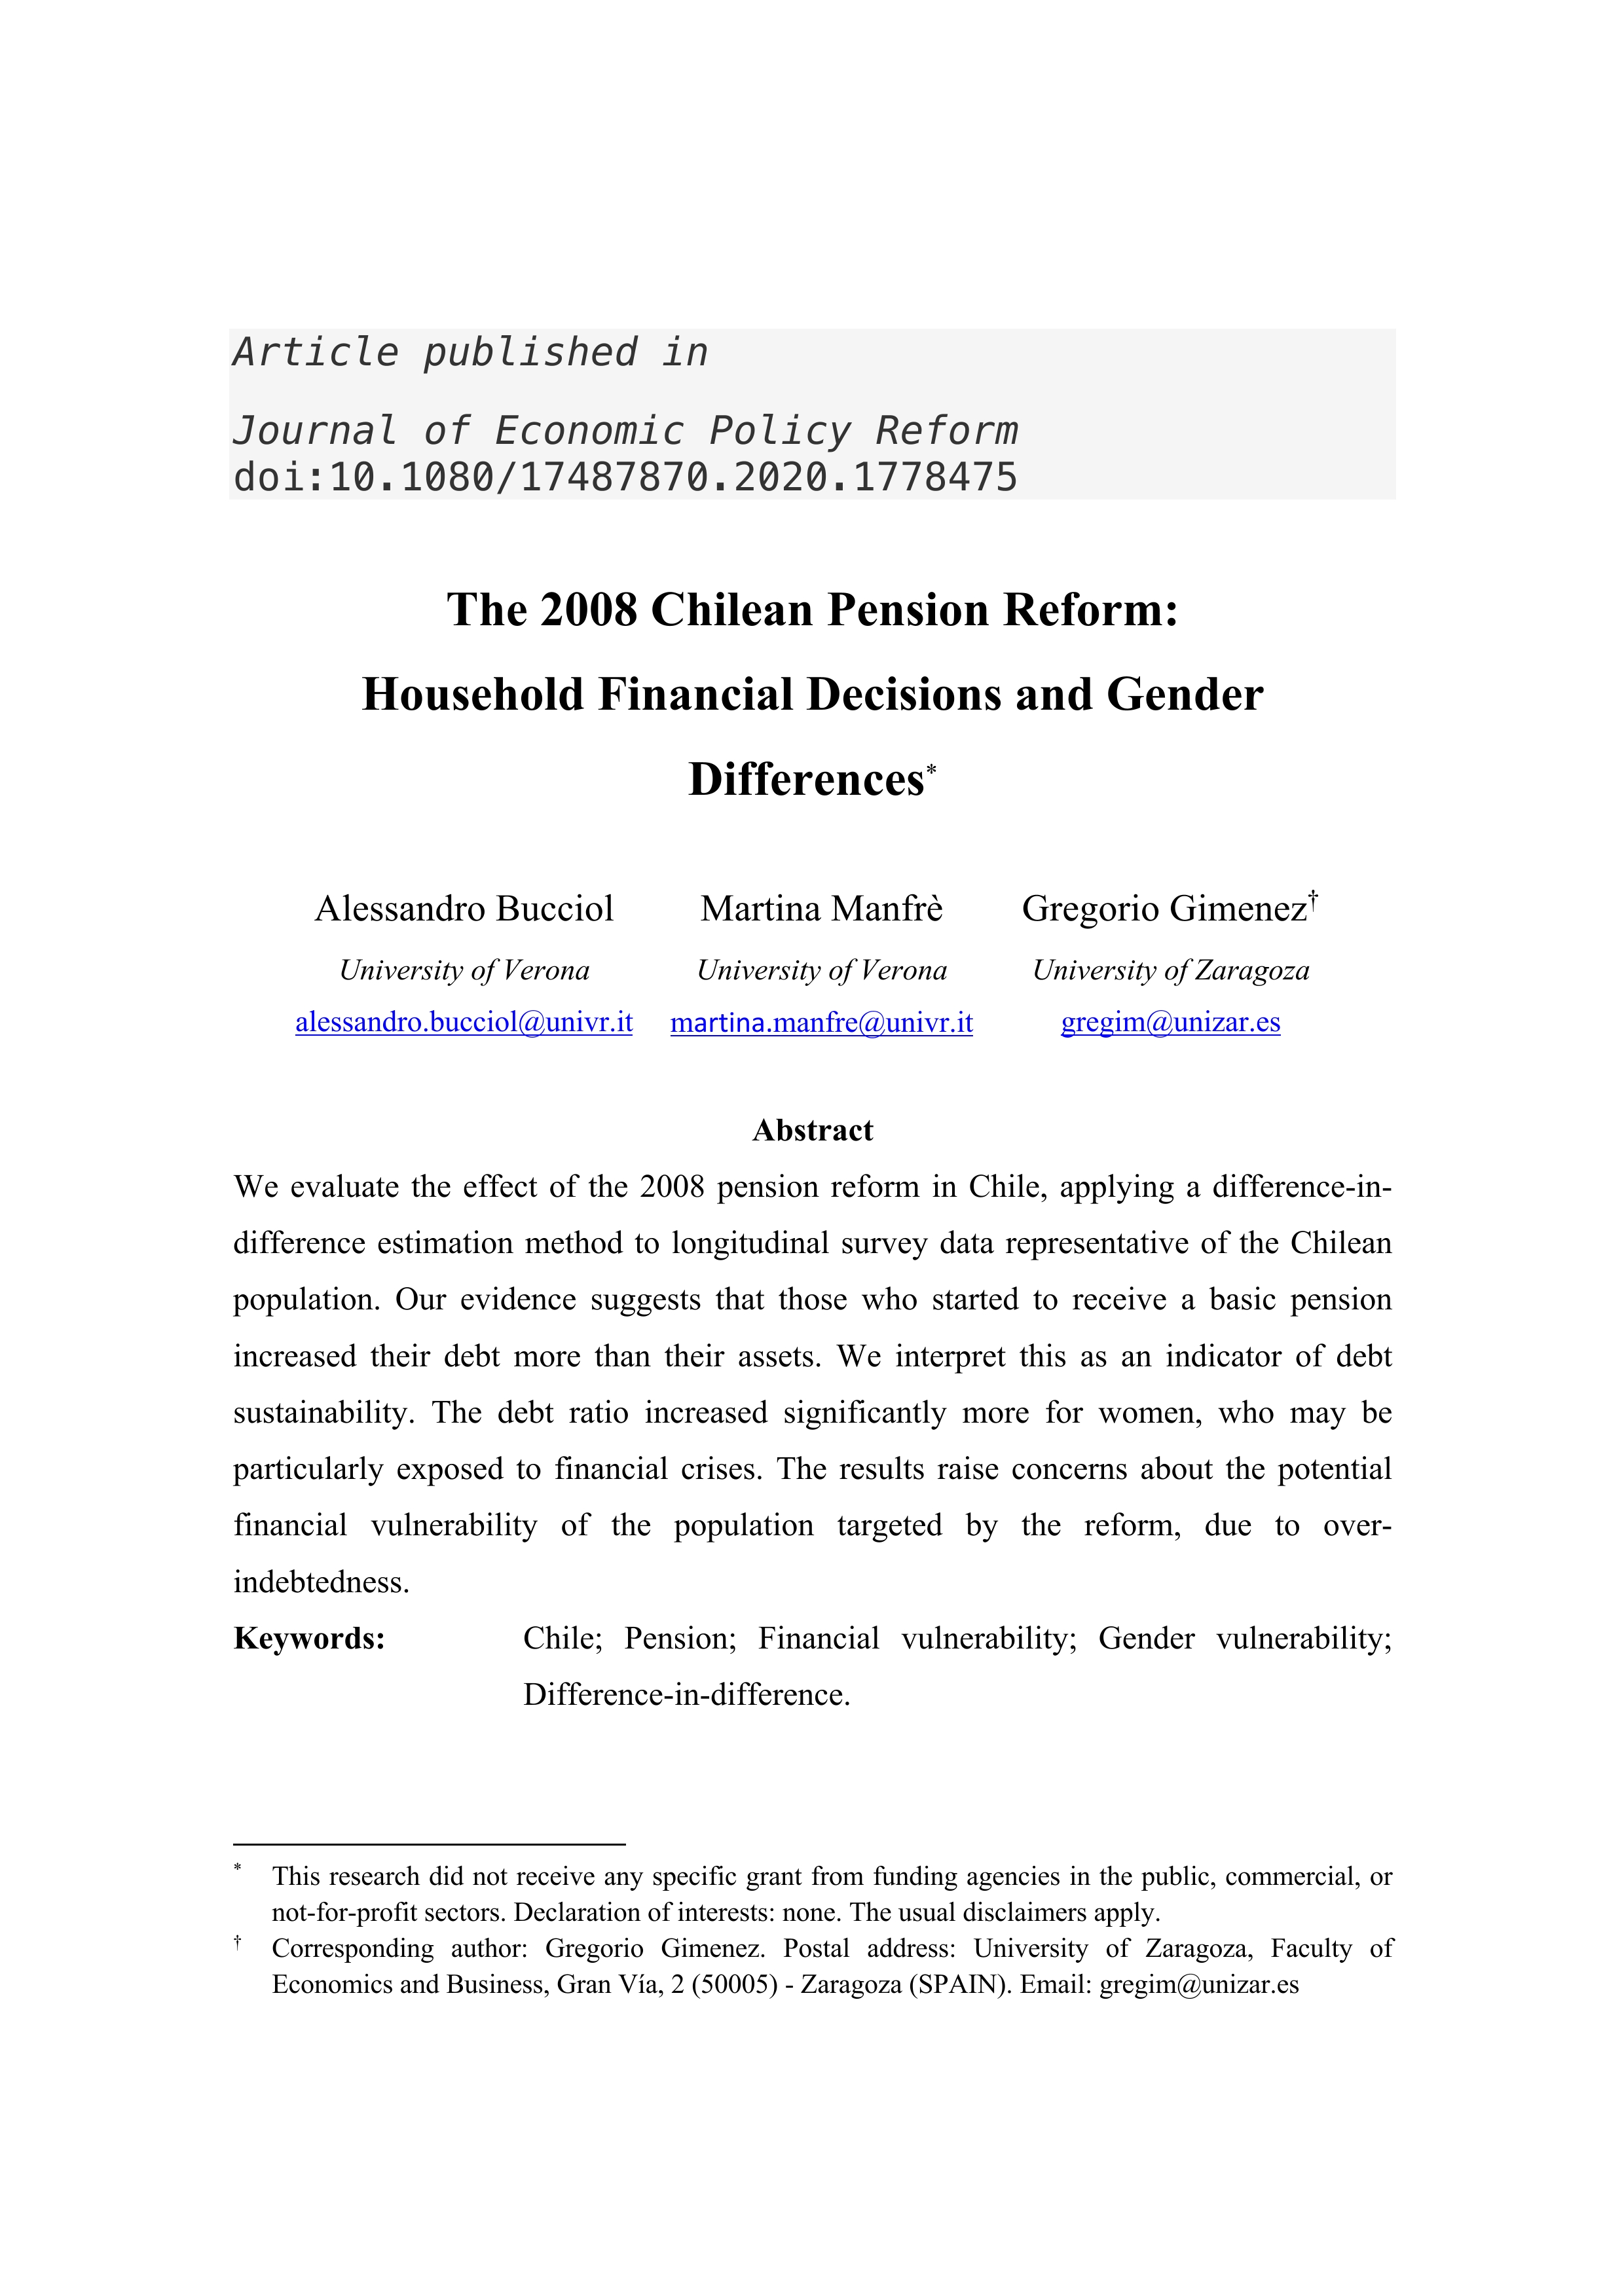 The 2008 Chilean pension reform: Household financial decisions and gender differences